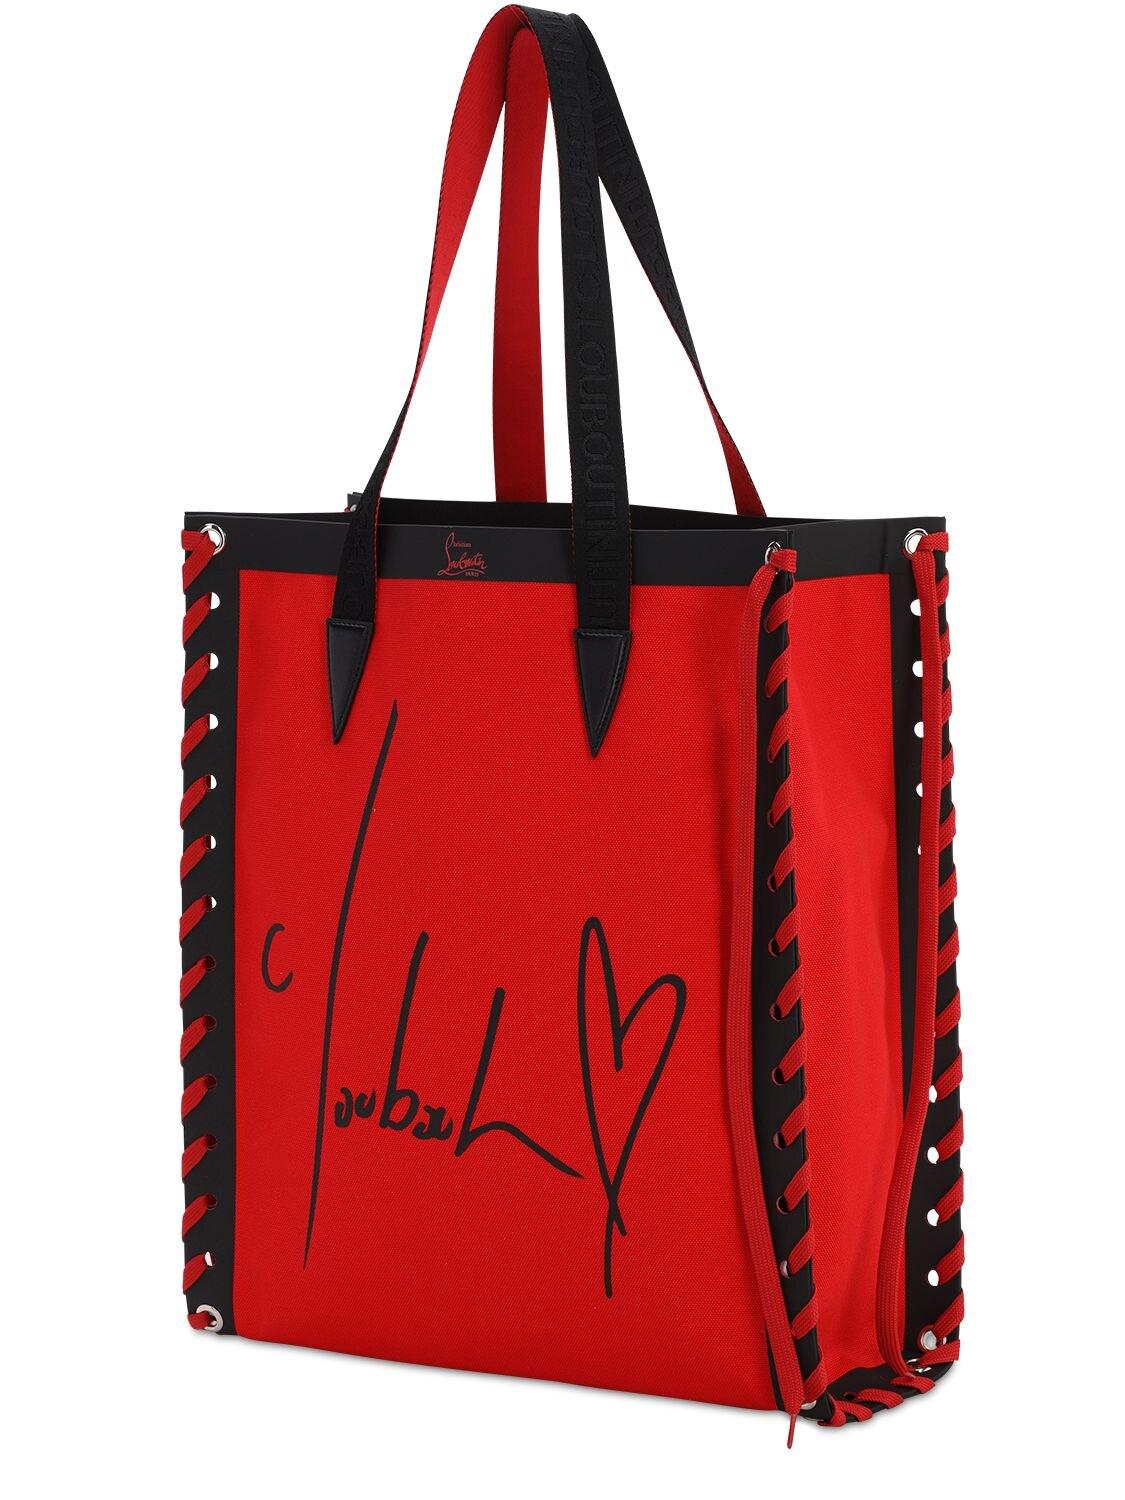 Christian Louboutin Cabalace Small Tote Bag in Red - Lyst